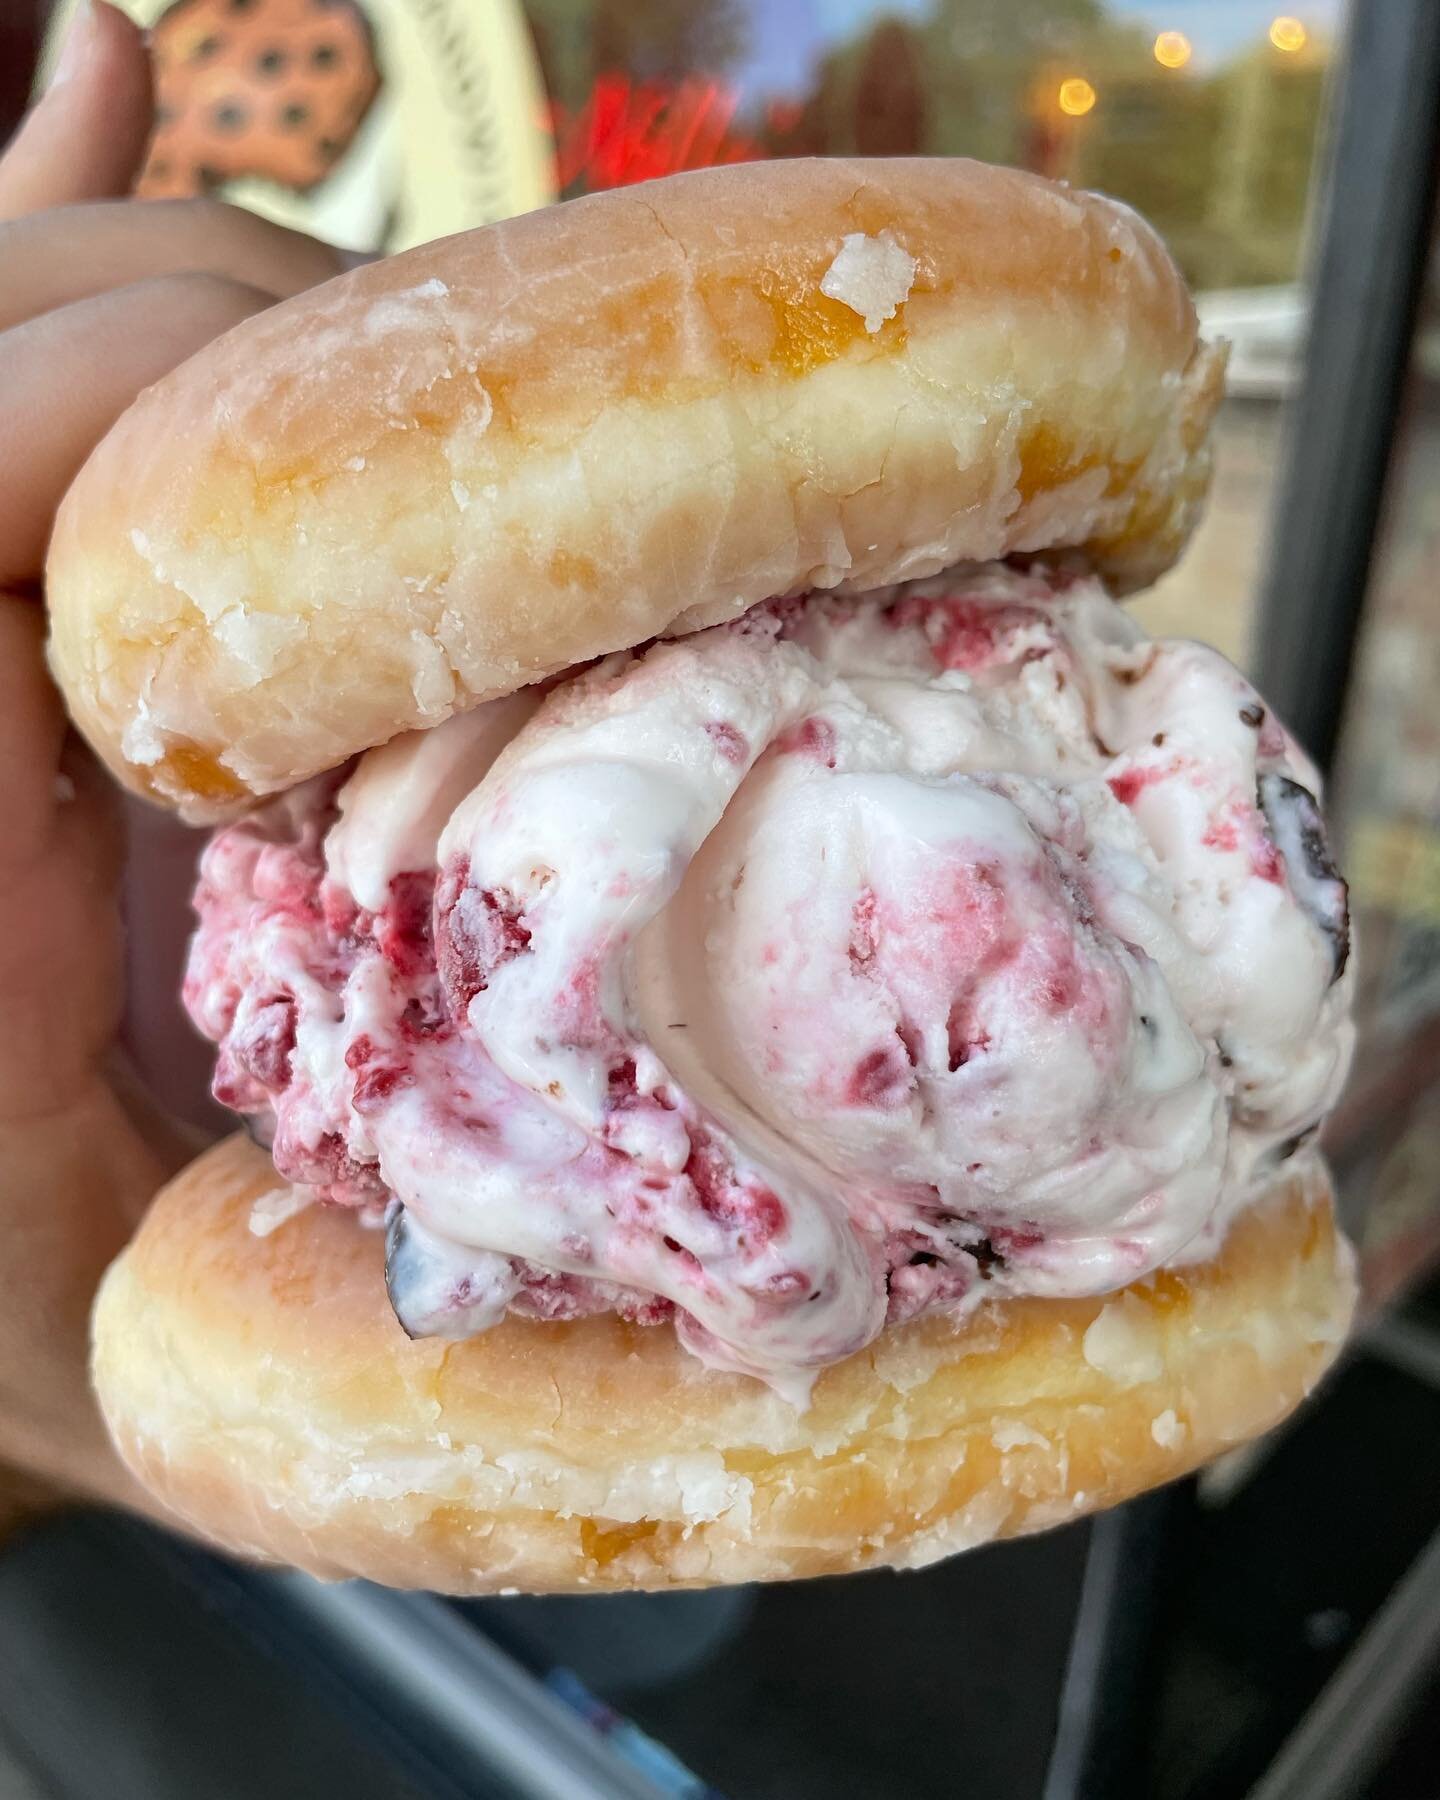 Yes&hellip;That&rsquo;s a donut. Yes&hellip; you can now make an ice cream sandwich with glazed donuts. 🍩🍦😳 Sundays Only @nelliesicecream!
#sundaydonuts #donuticecreamsandwich #sundayfunday